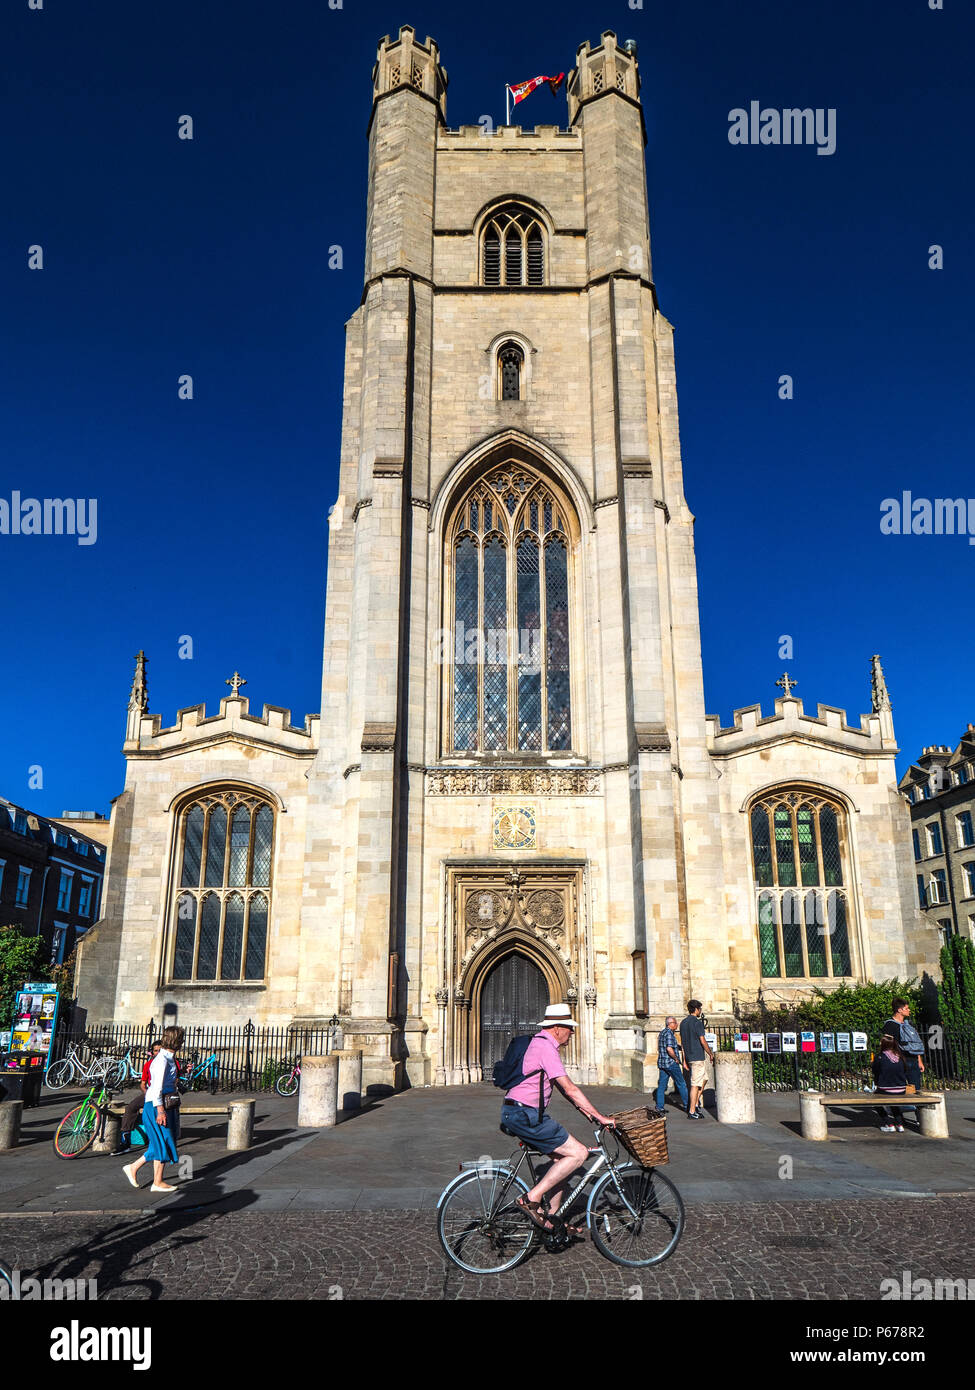 Cambridge Tourism - cyclists pass Great St Mary's church in central Cambridge. The church, rebuilt after a fire in 1290, is Cambridge University Churc Stock Photo